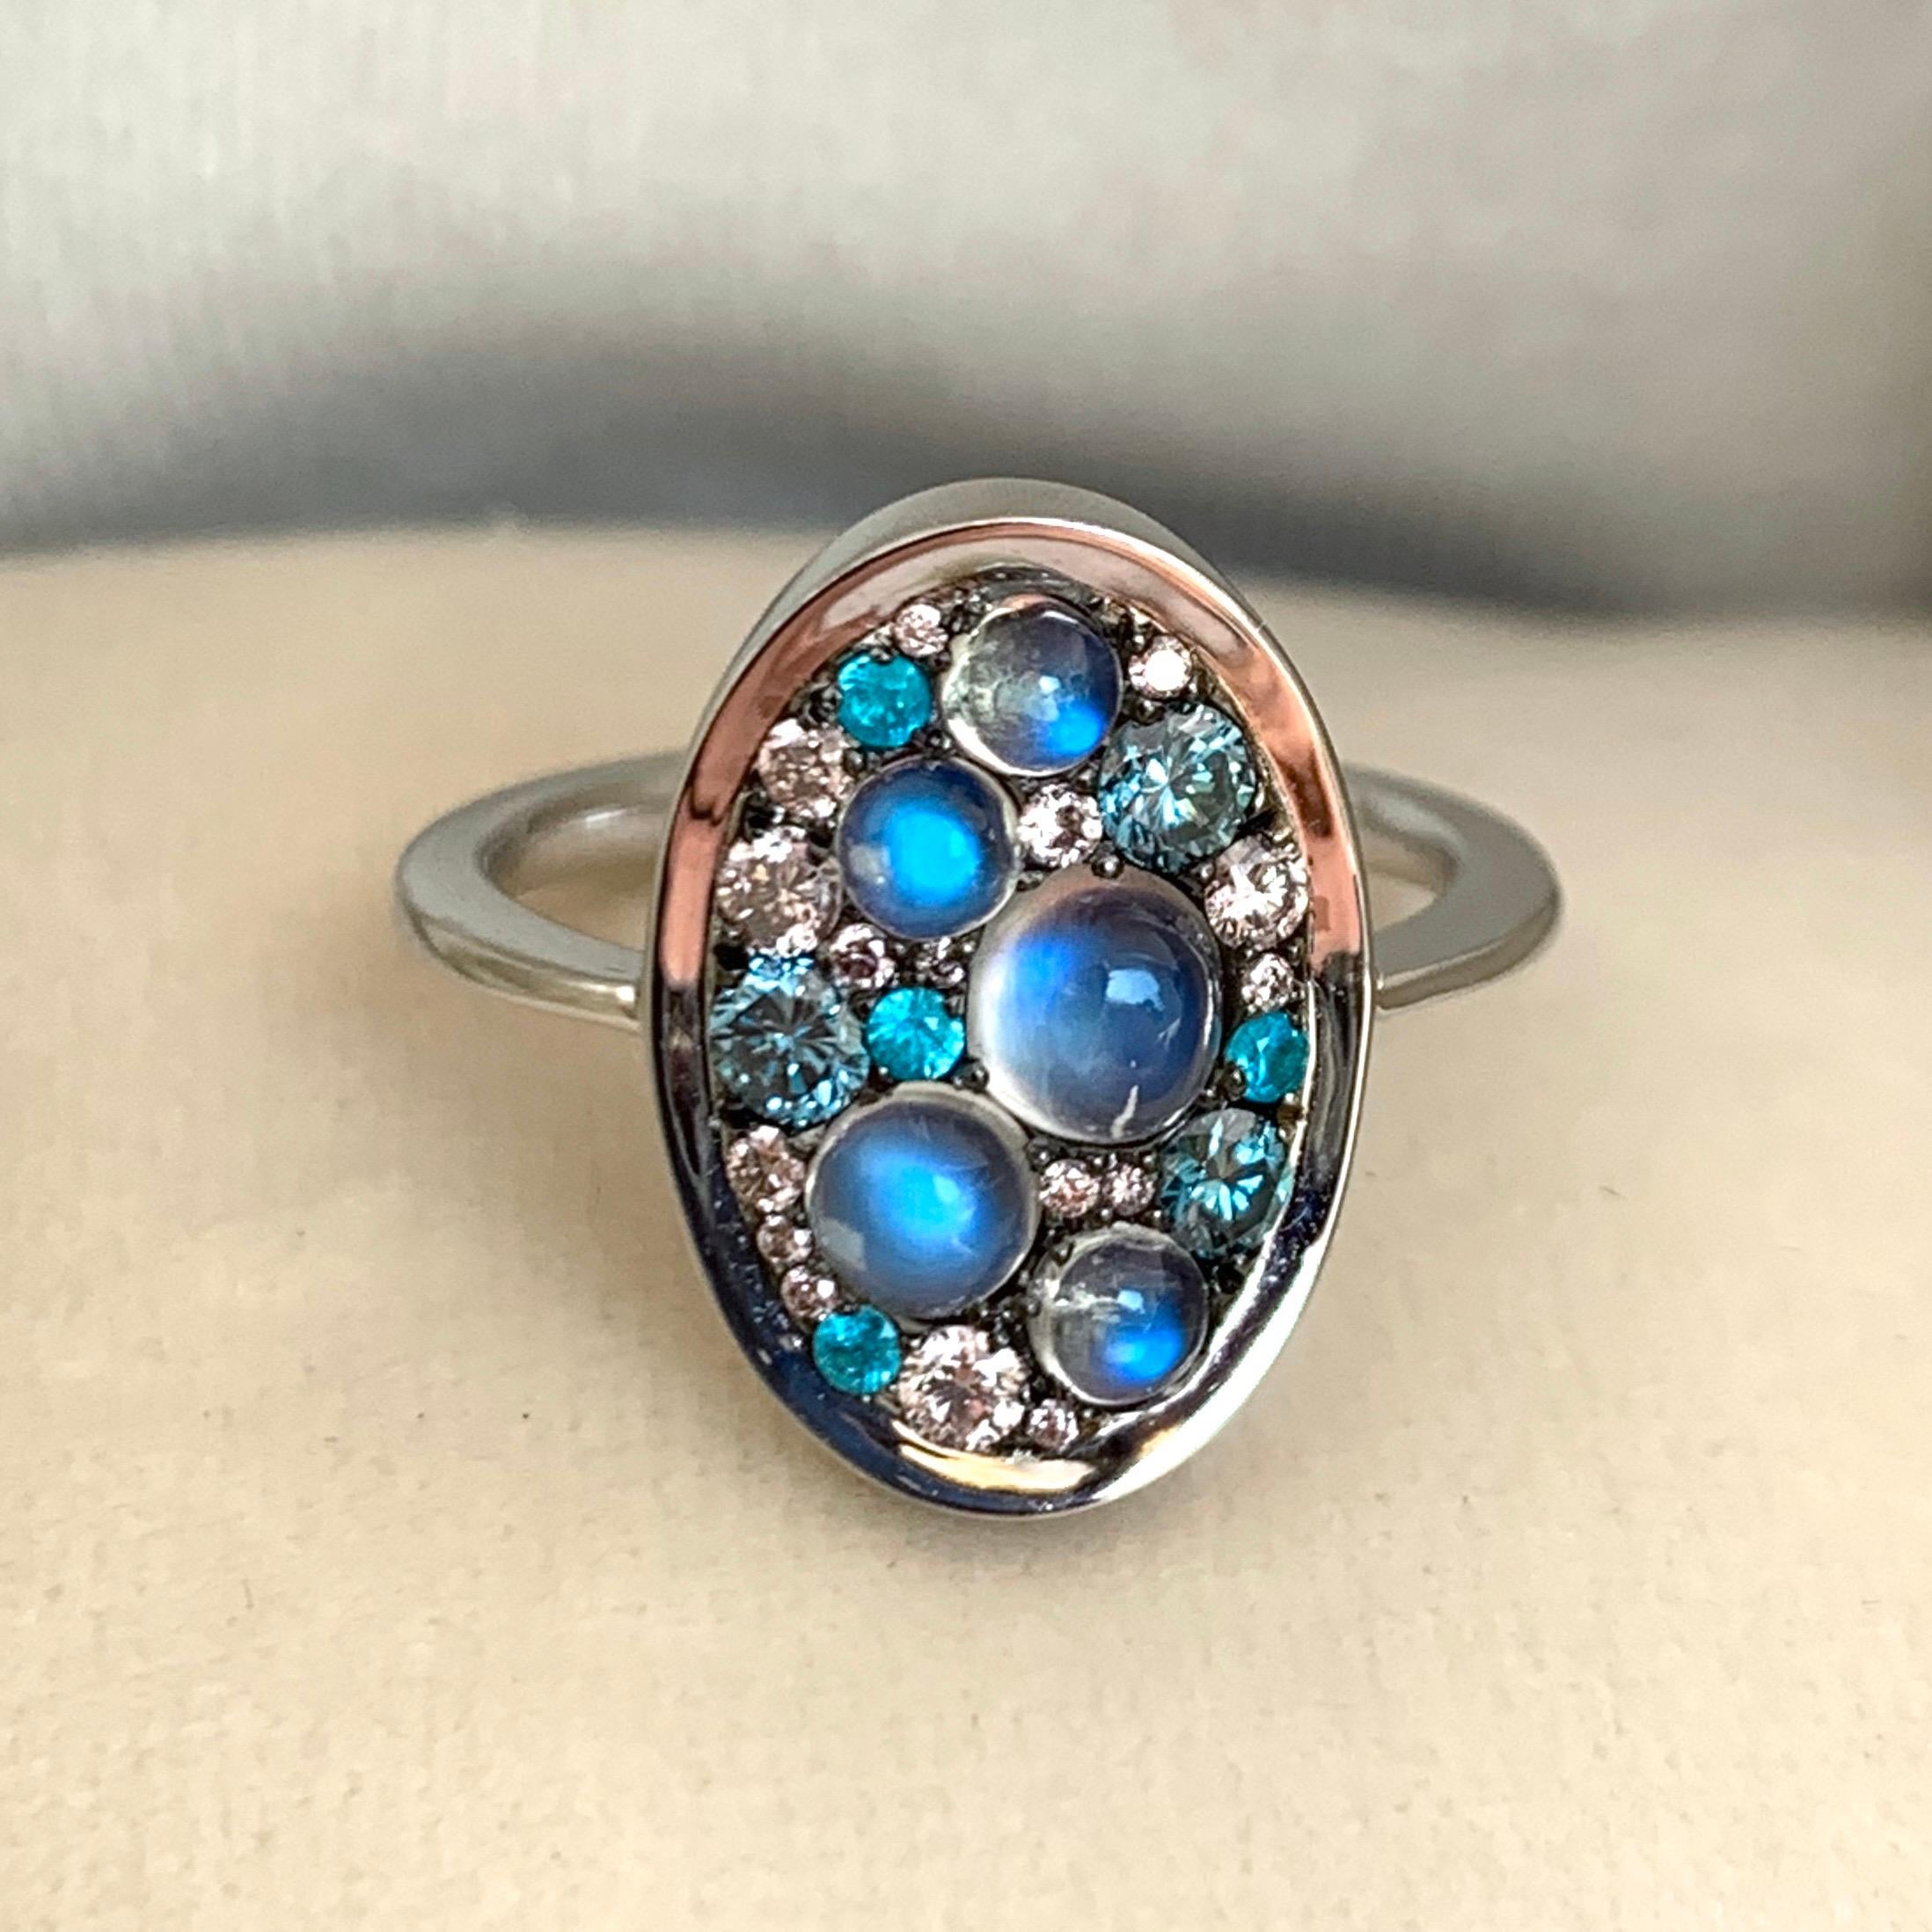 One of a kind ring in 18K White gold 4,9g & blackened sterling silver (The stones are set on blackened sterlingsilver to create a black background for the stones) Pave set with Ceylon Moonstone cabochons 1,1 ct., Fancy Pink diamonds, natural colored